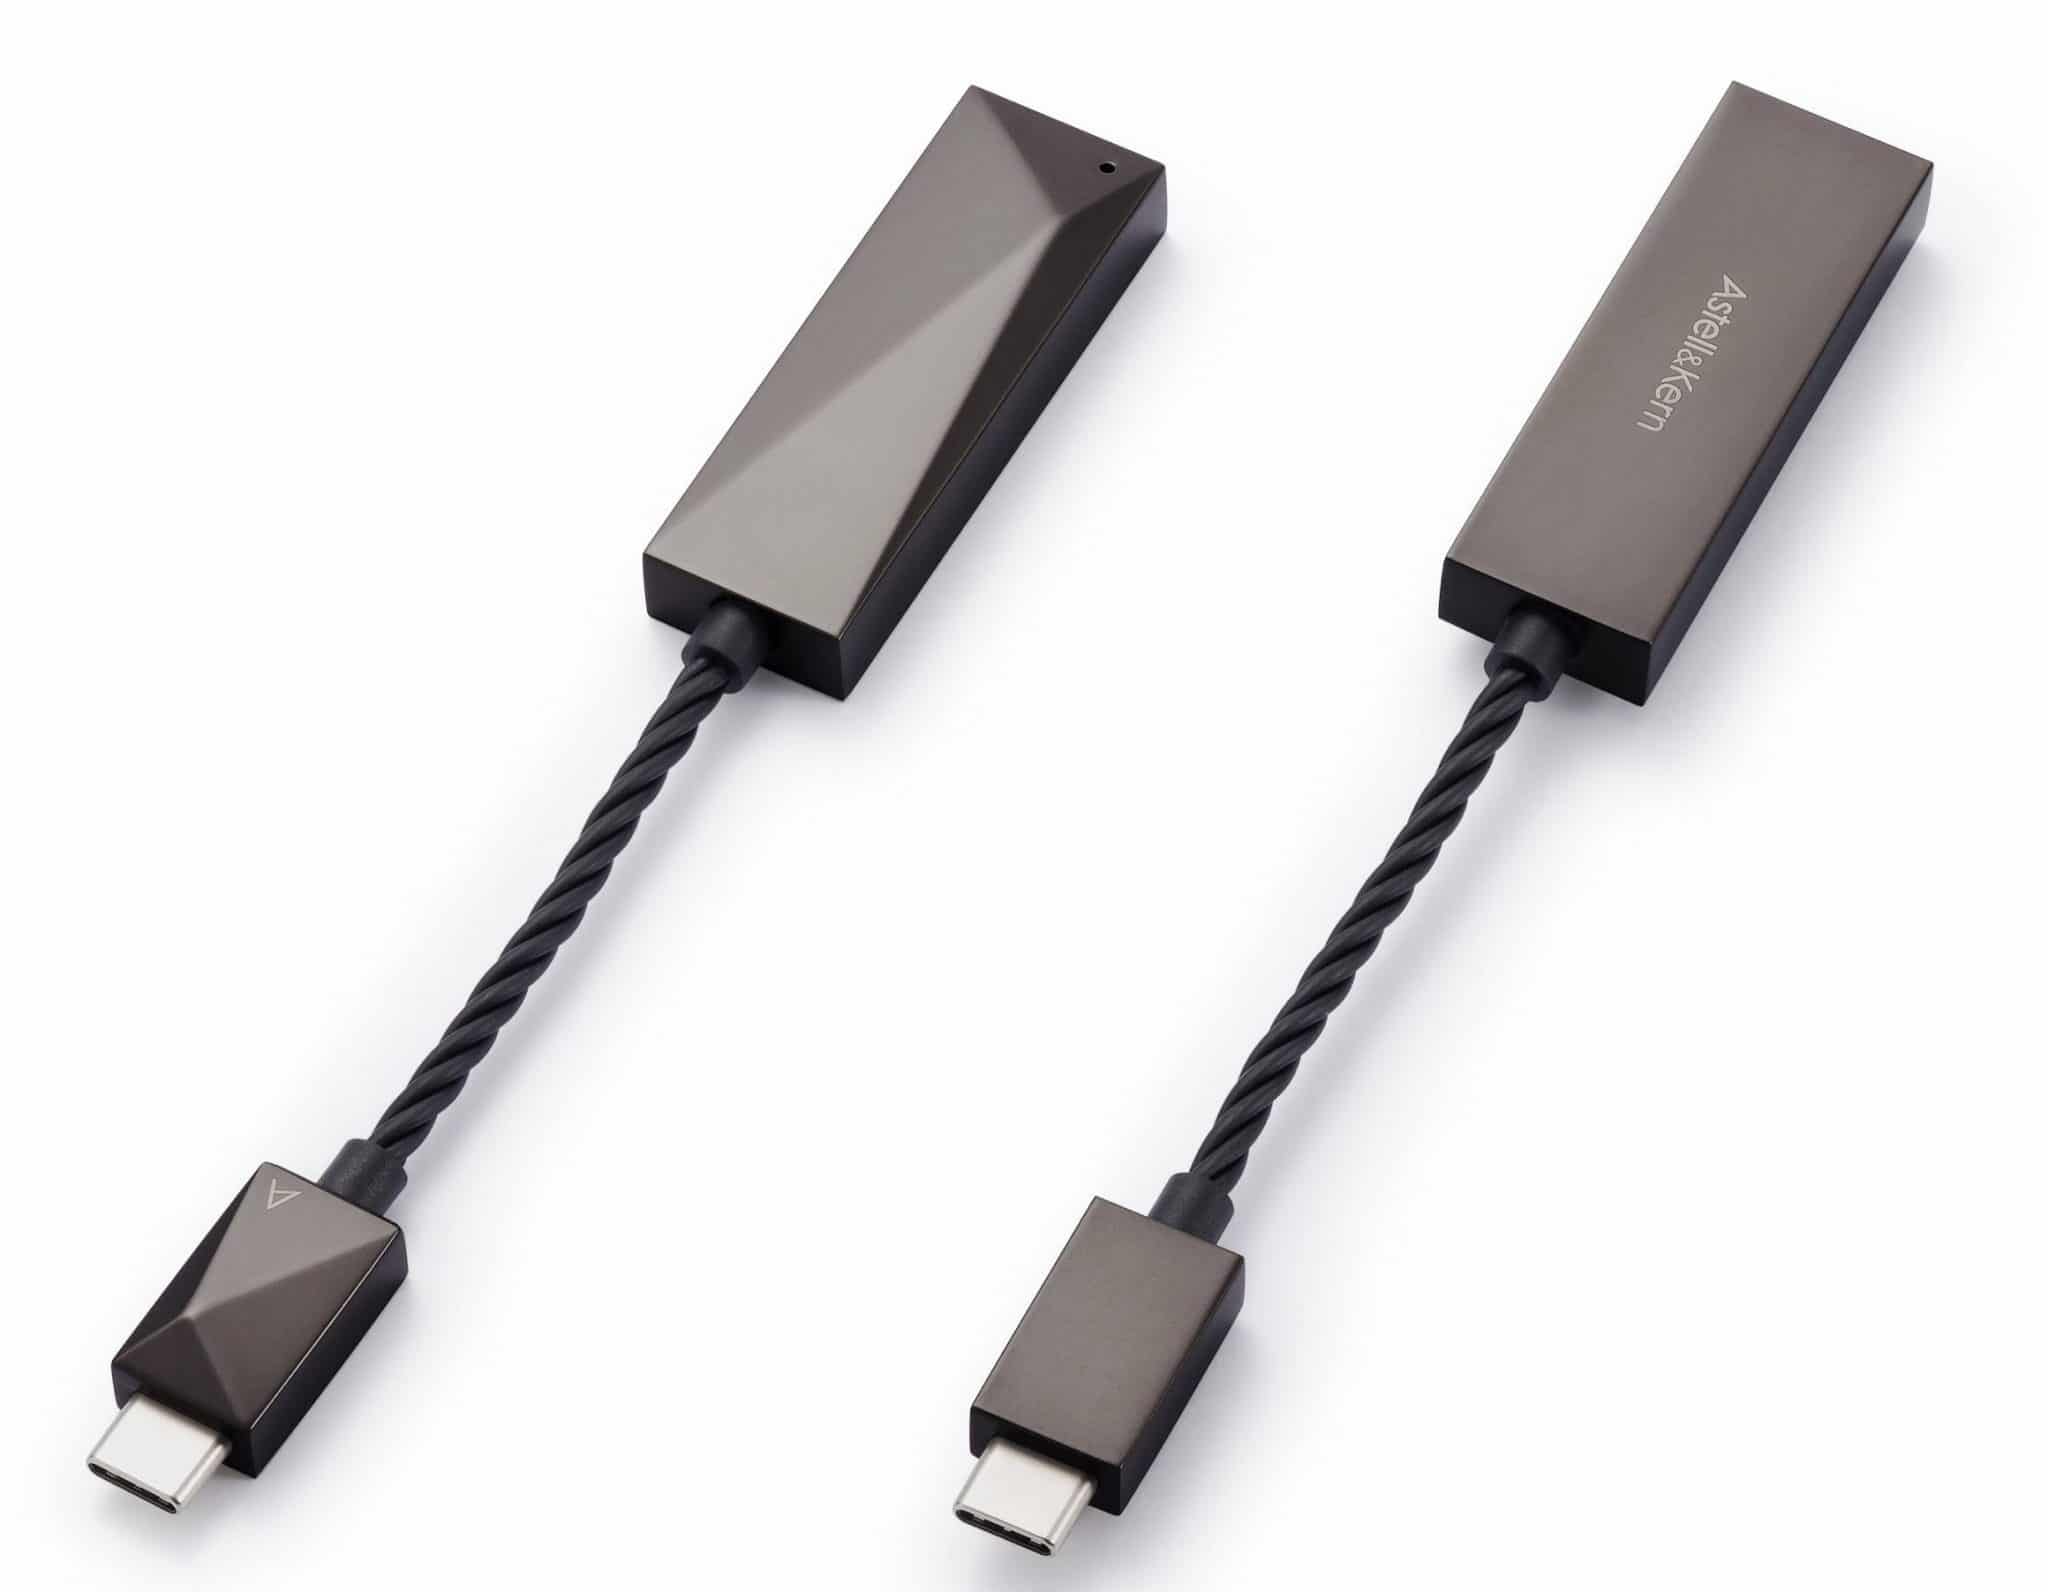 AK USB-C Dual DAC Cable From Astell&Kern